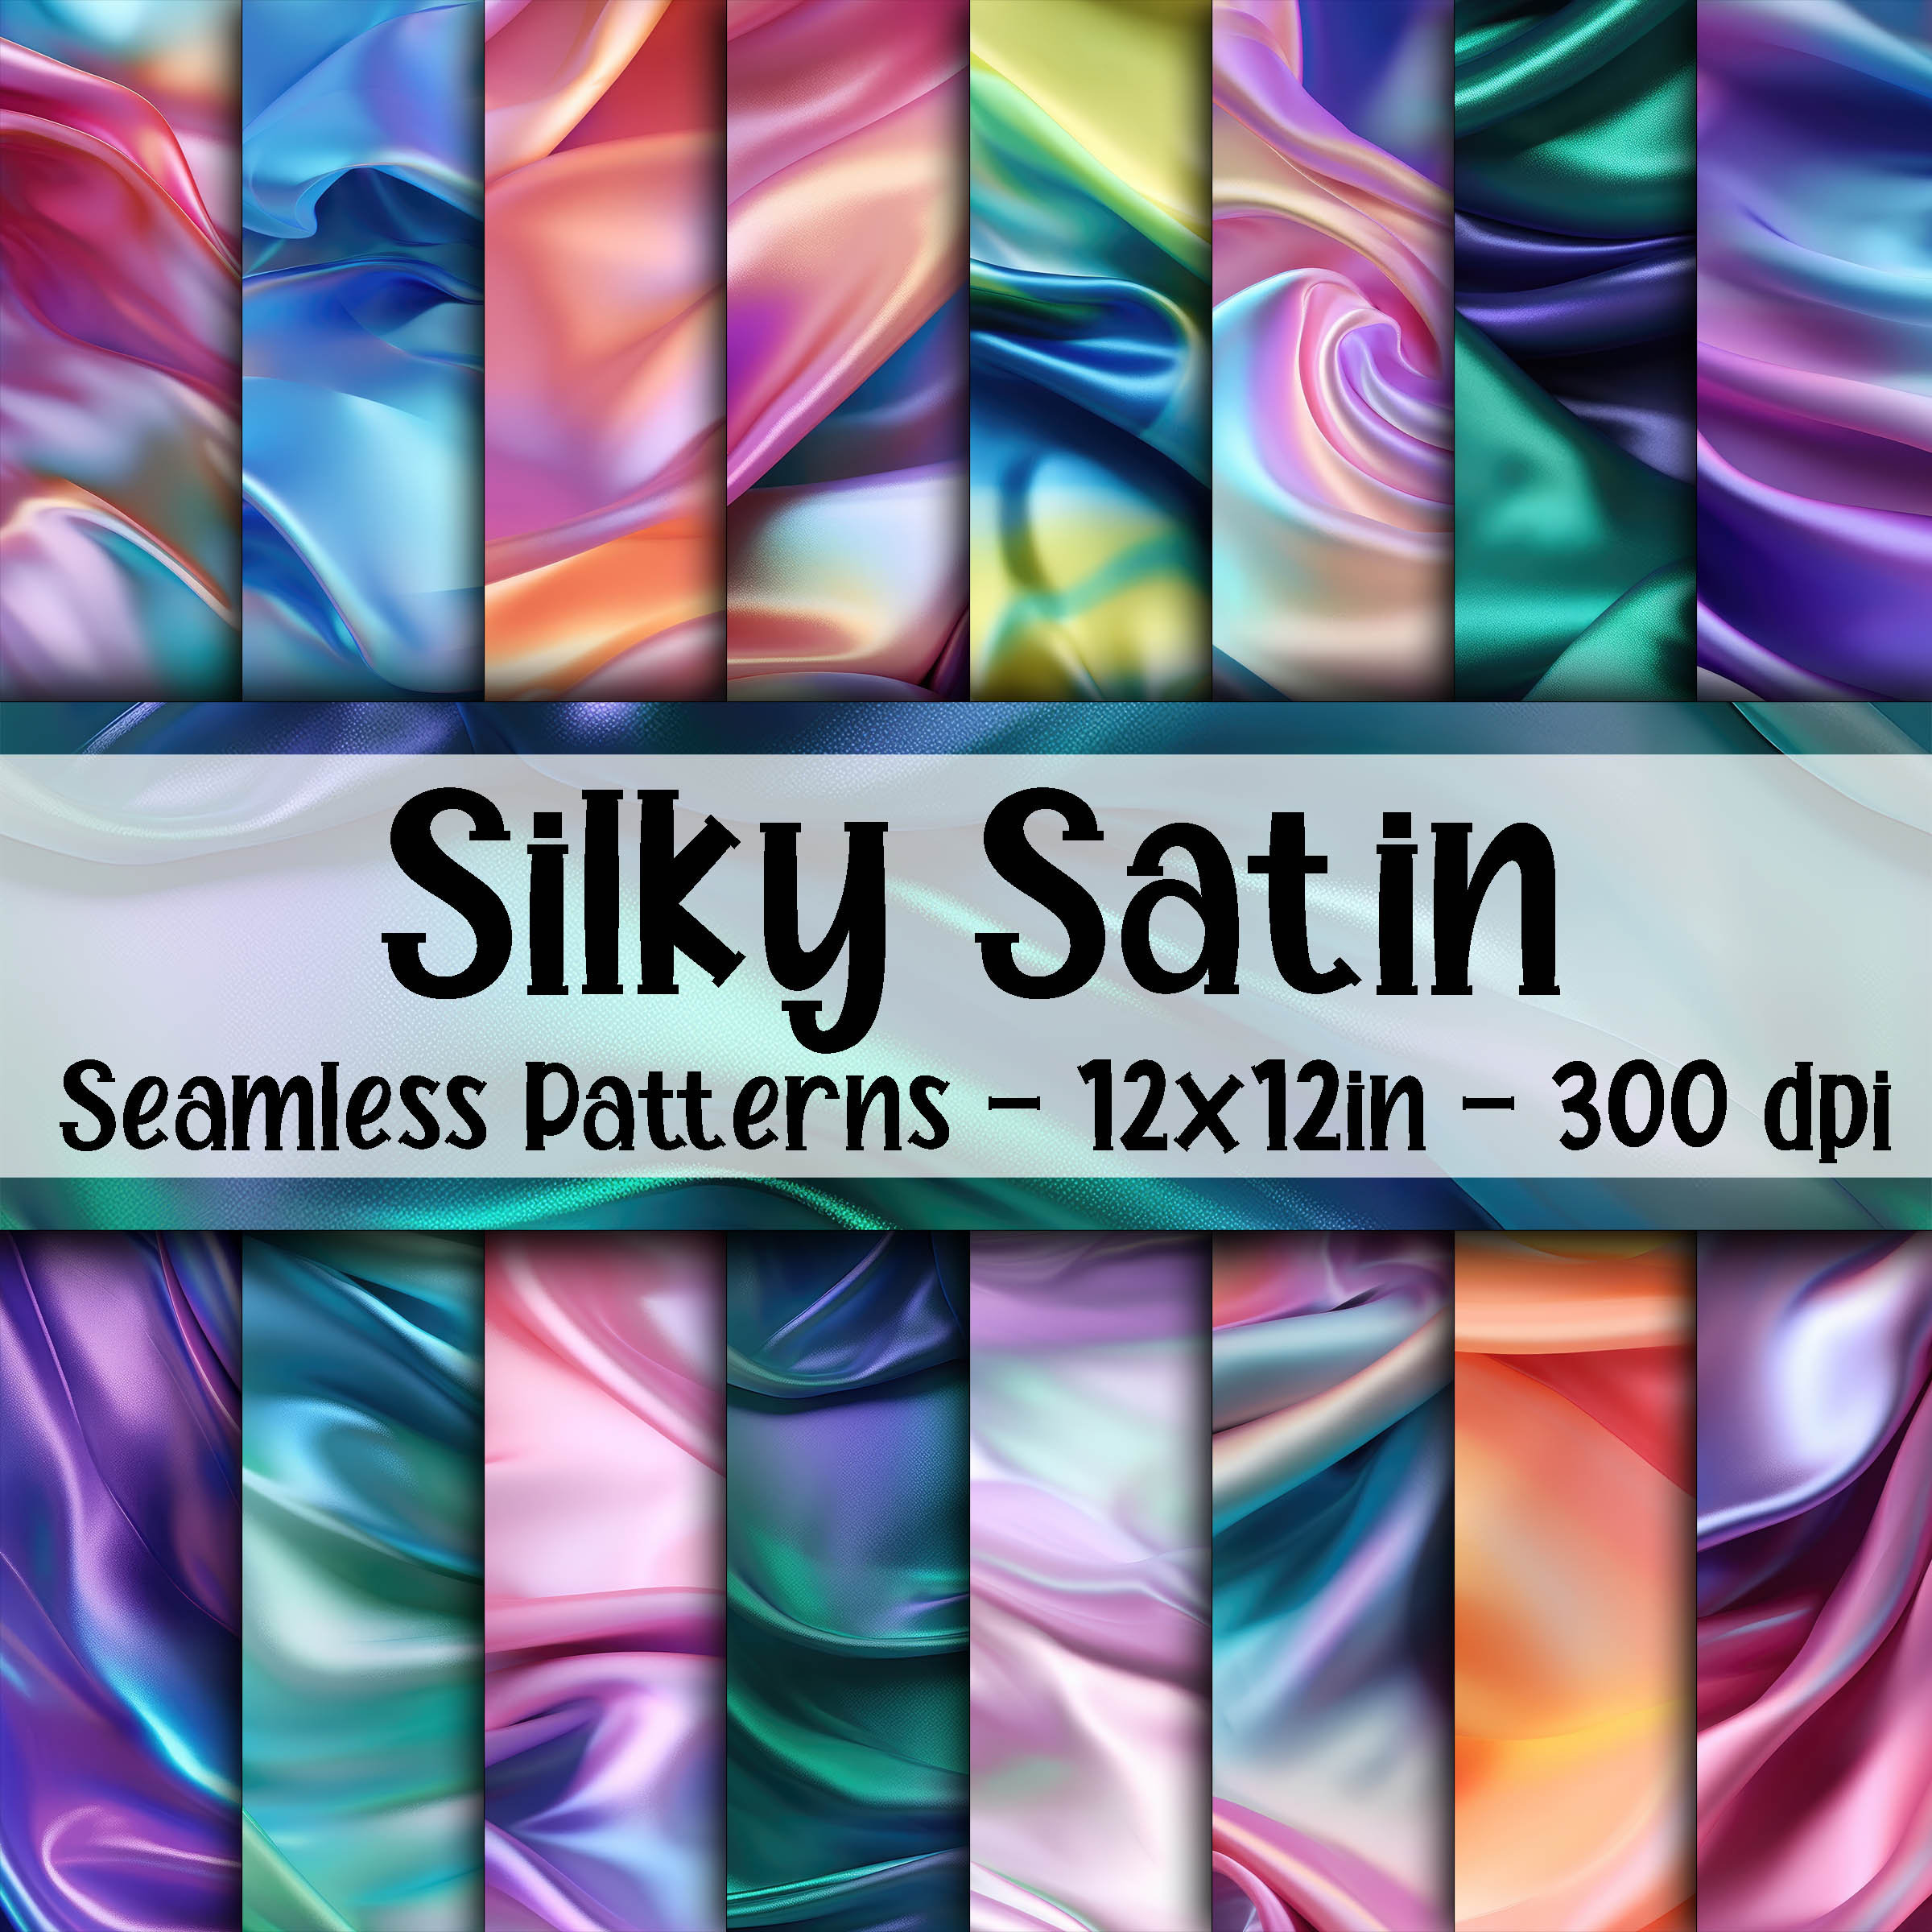 Silky Satin SEAMLESS Patterns - Silky Satin Digital Paper - 16 Designs -  12x12in - Commercial Use - Iridescent Satin Textures